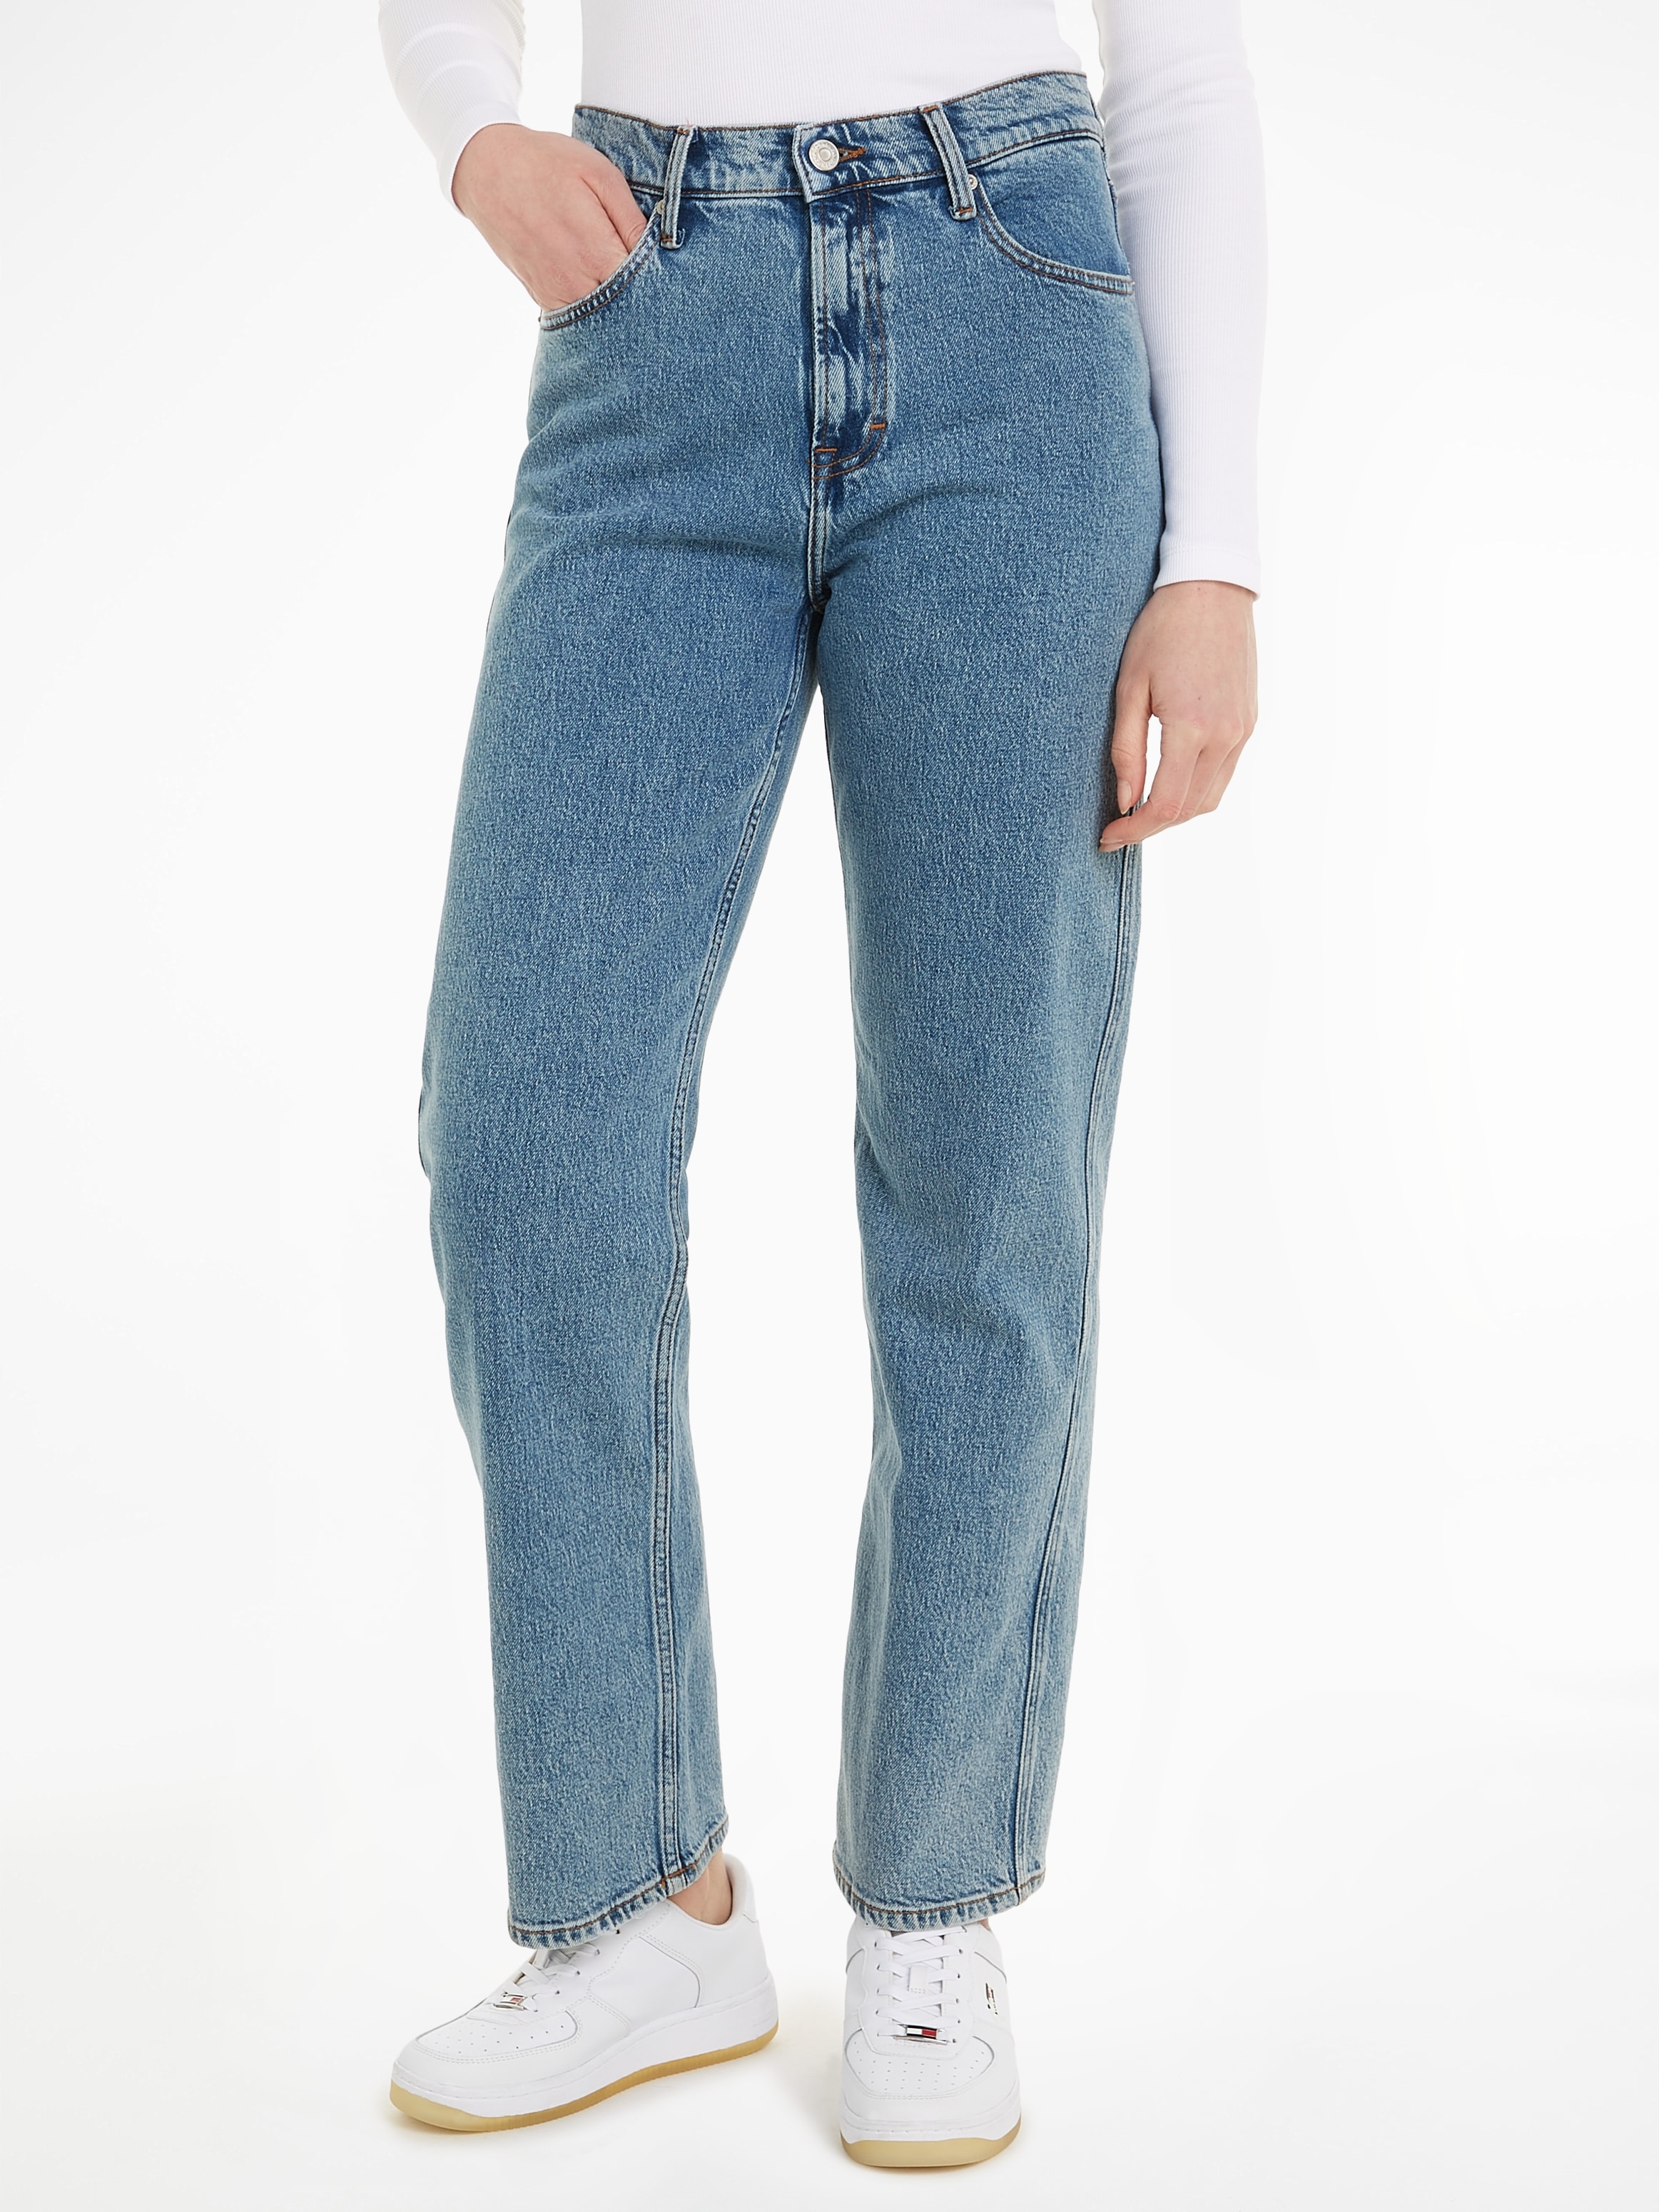 Style Jeans bei Weite Jeans »BETSY Five LS Pocket im OTTOversand CG4136«, Tommy MD